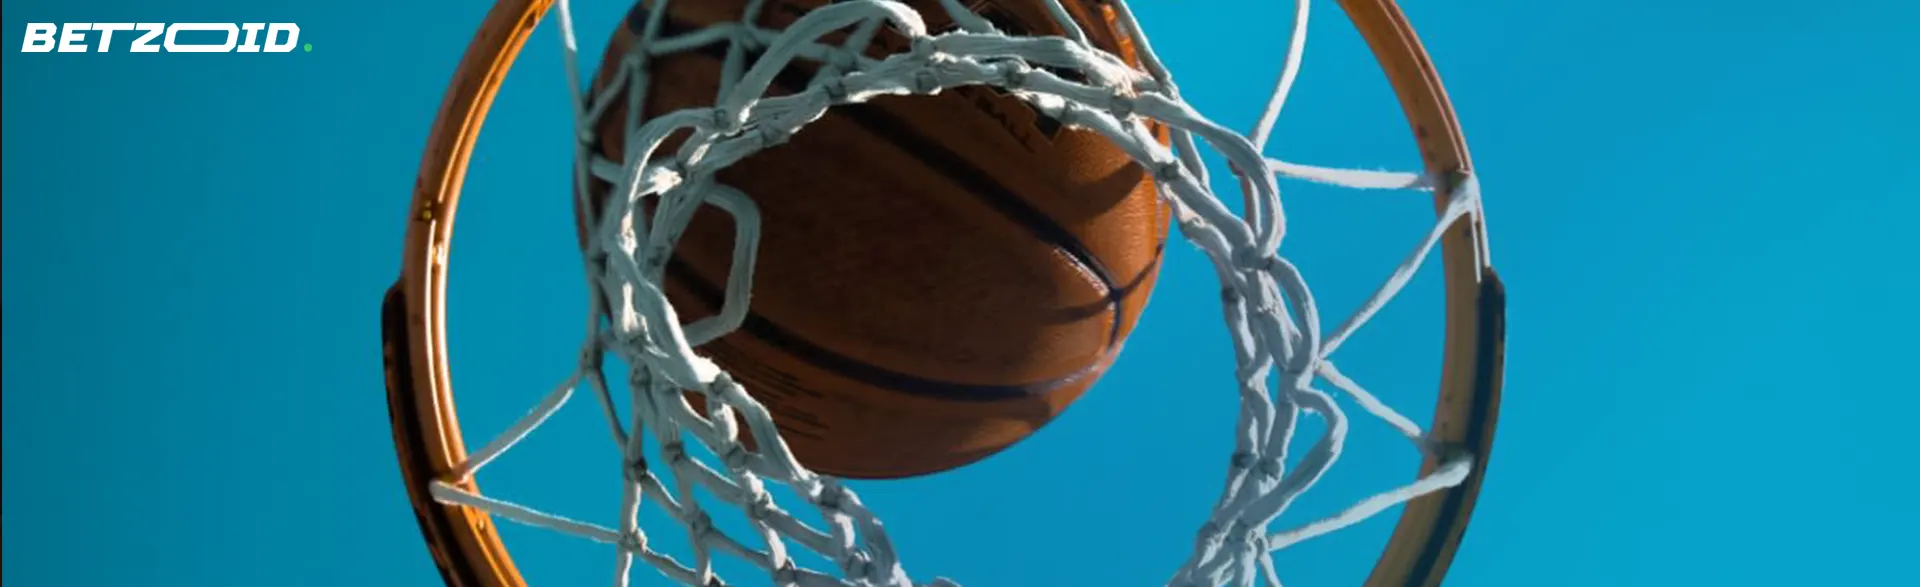 A basketball scoring a basket, viewed from below against a clear blue sky.